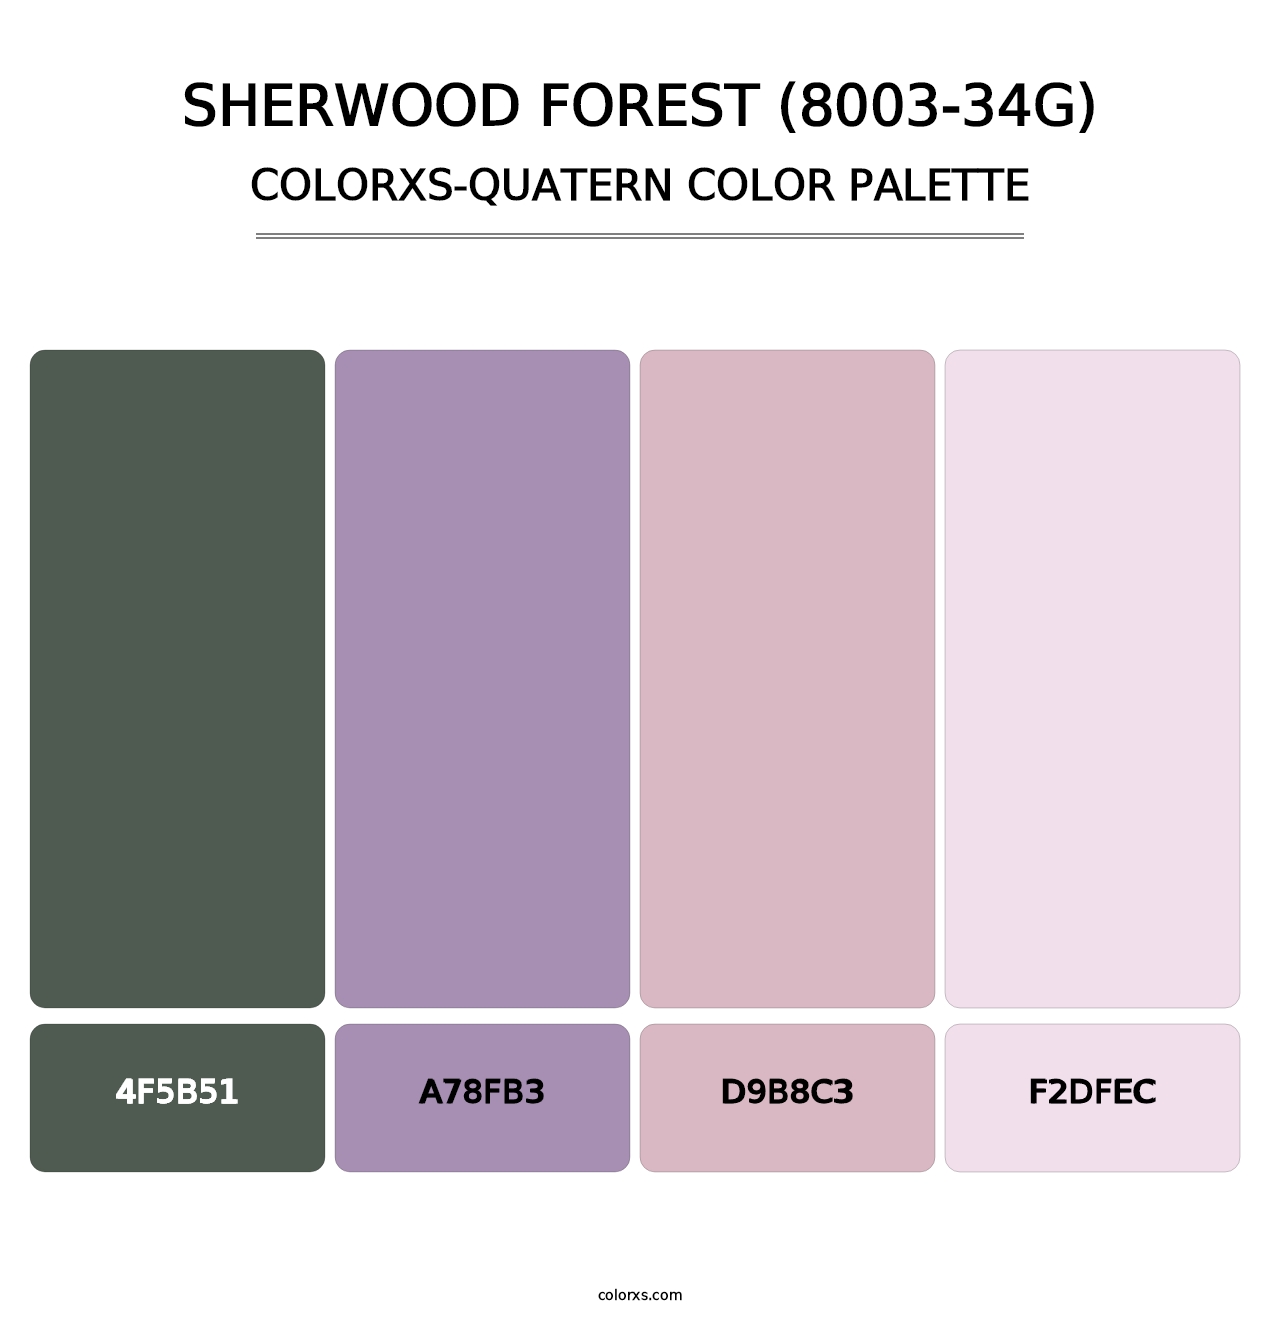 Sherwood Forest (8003-34G) - Colorxs Quatern Palette